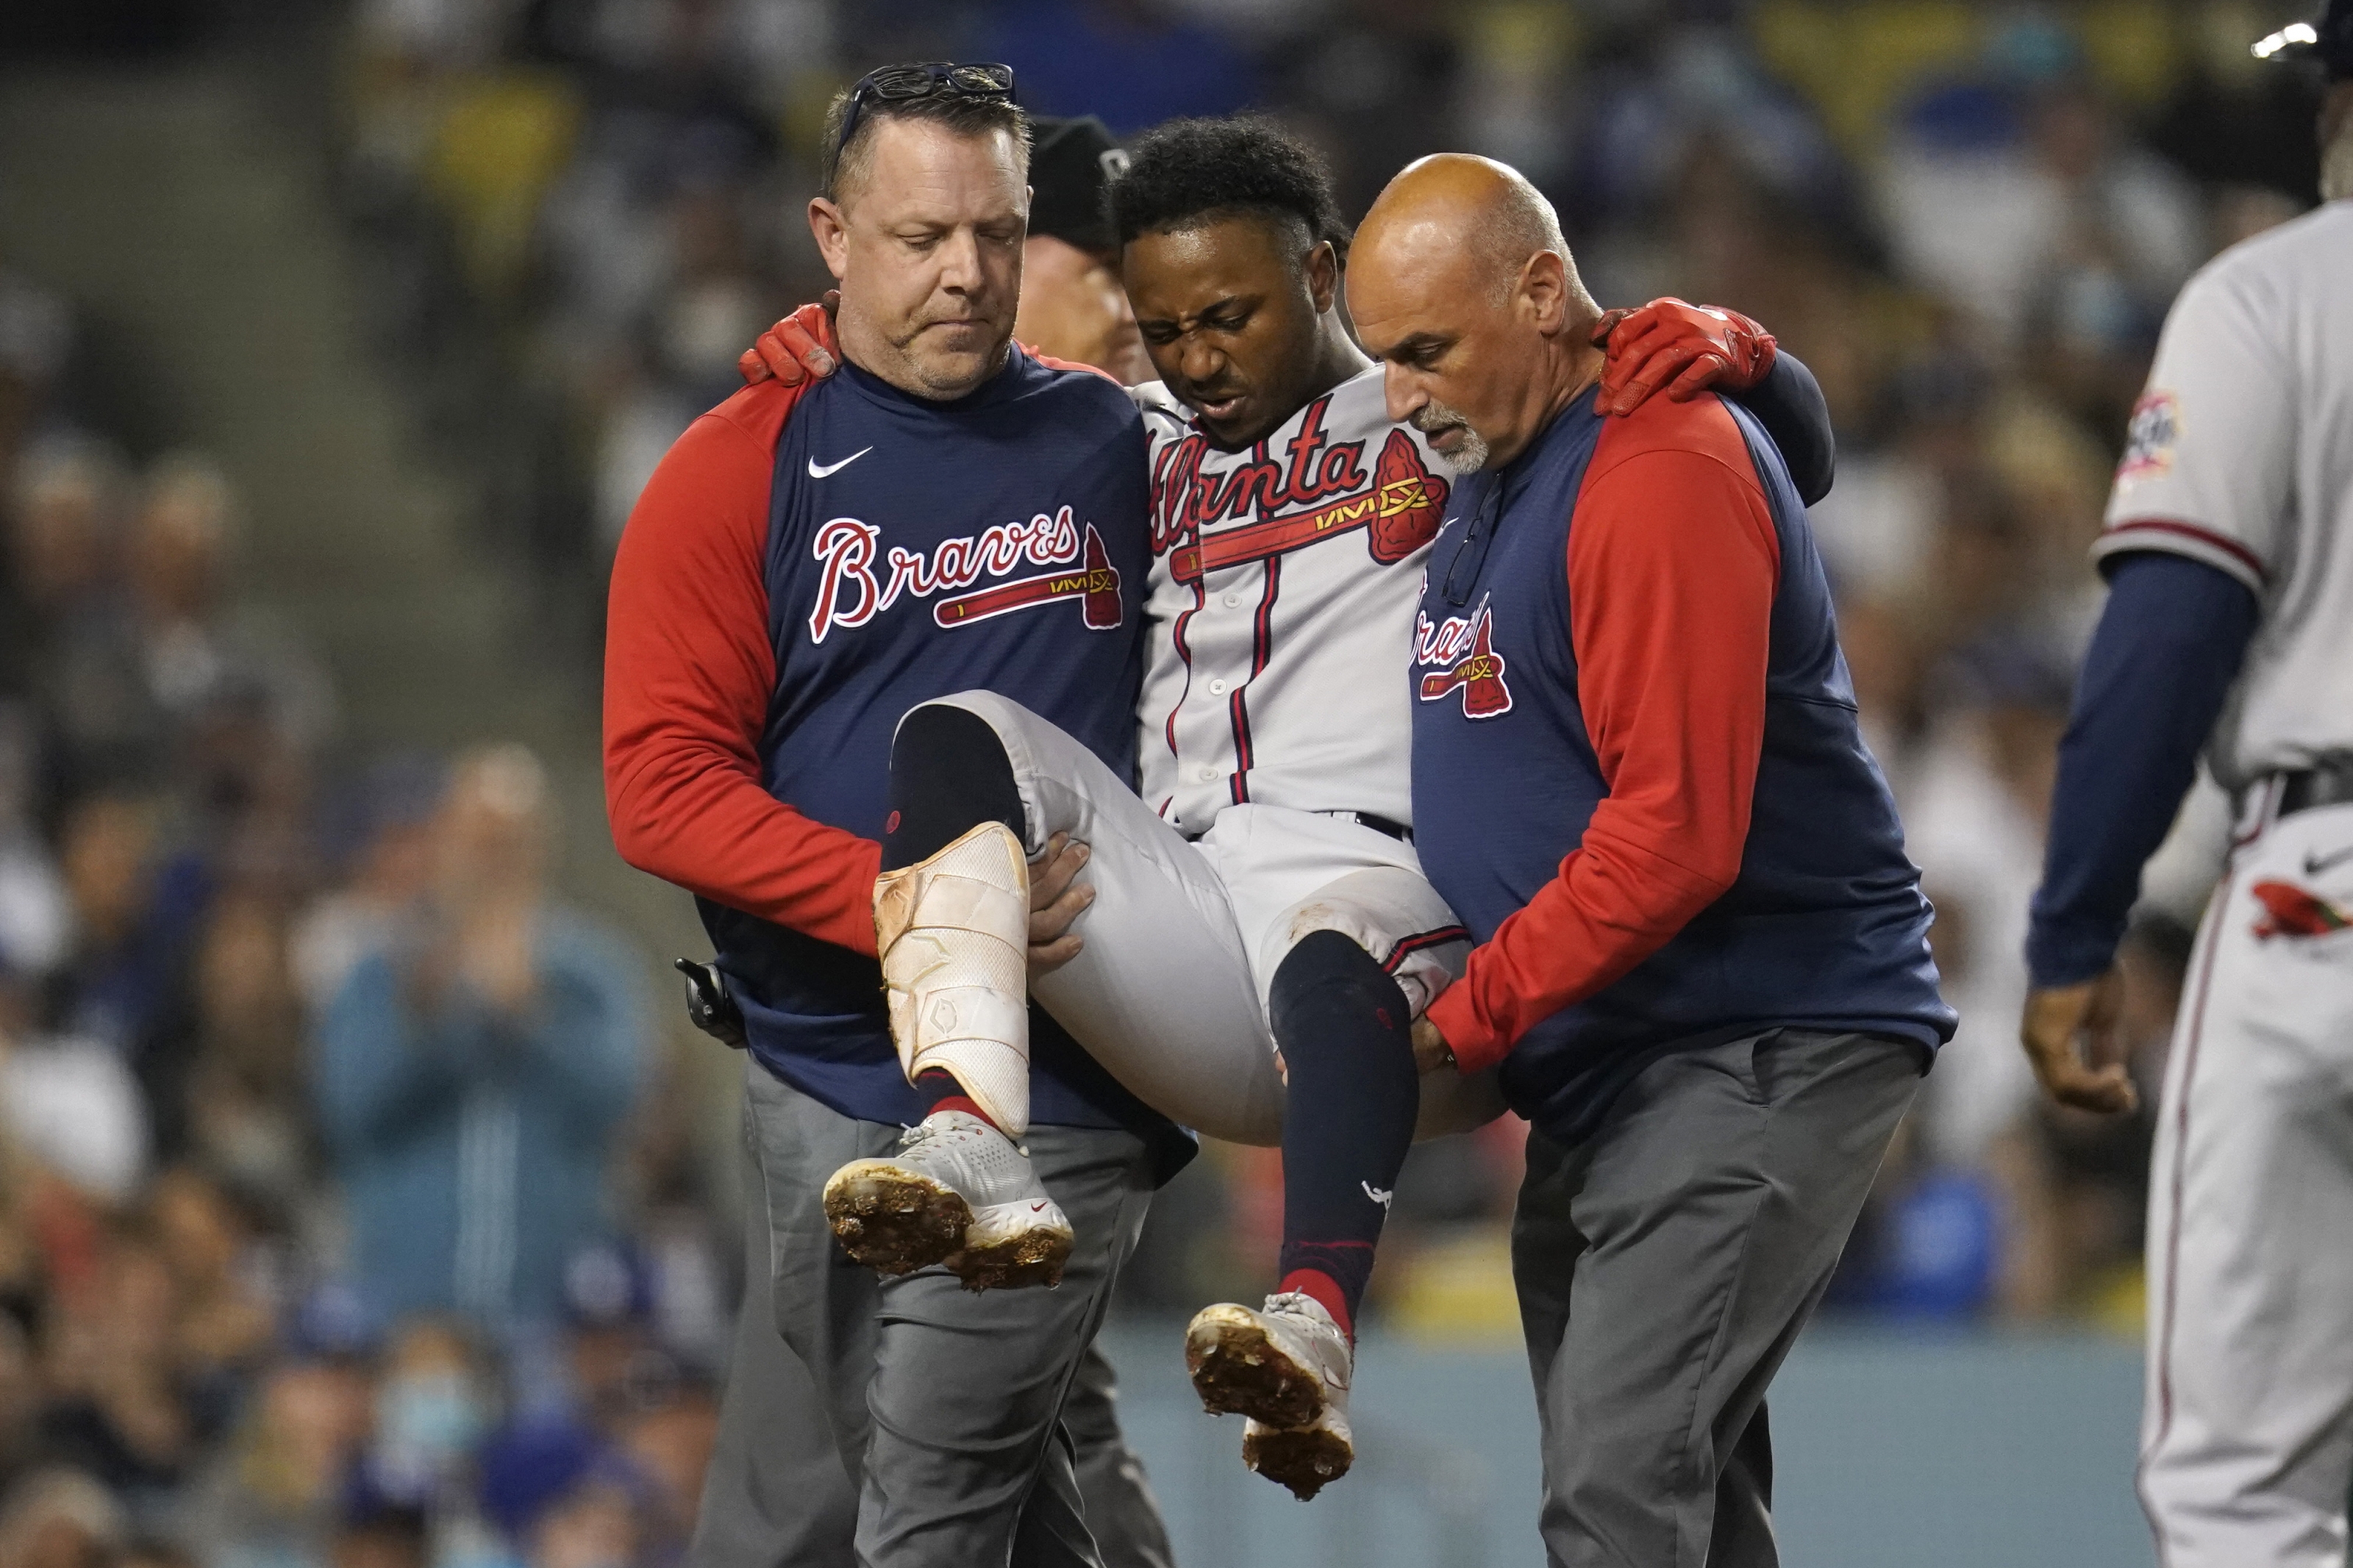 Braves star Albies carried away after fouling ball off knee - WTOP